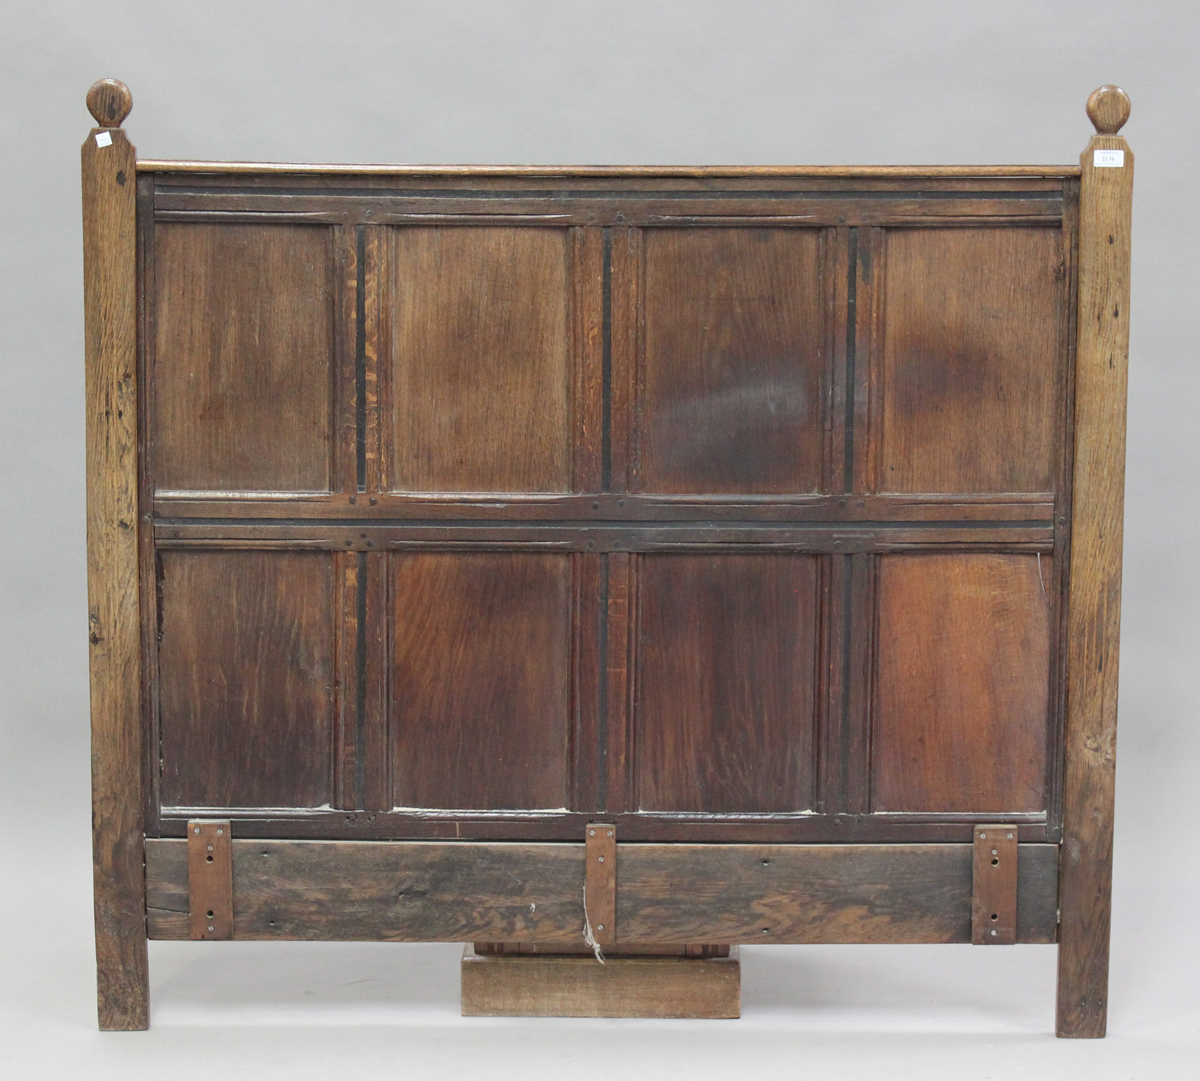 A 17th century and later oak panelled double headboard, height 130cm, width 139cm.Buyer’s Premium